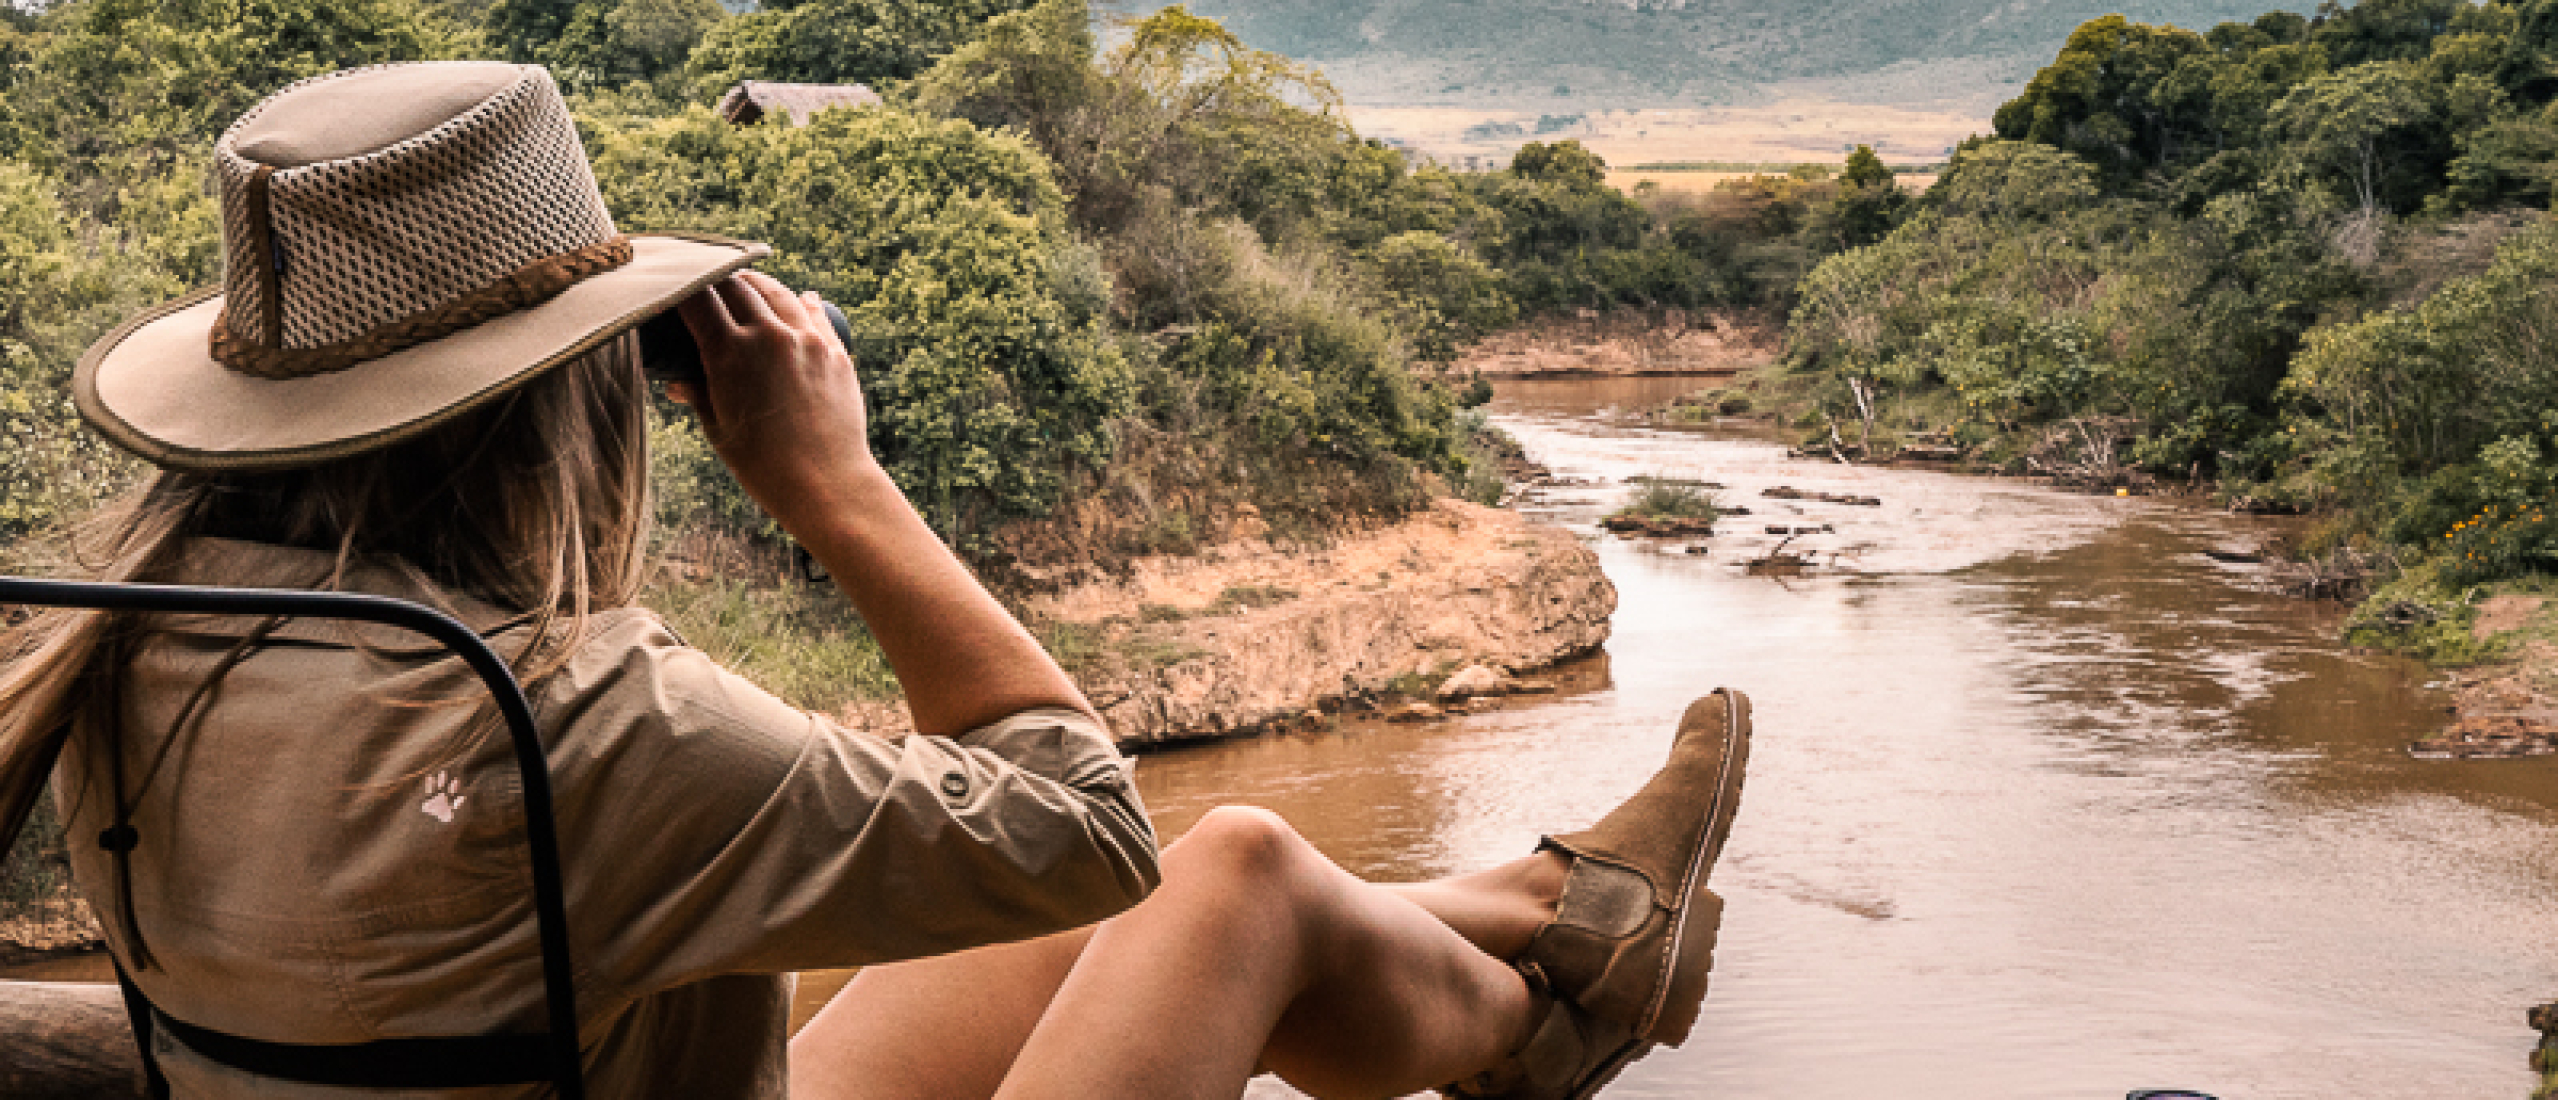 What to pack for safari in Africa? Detailed Safari Packing Guide